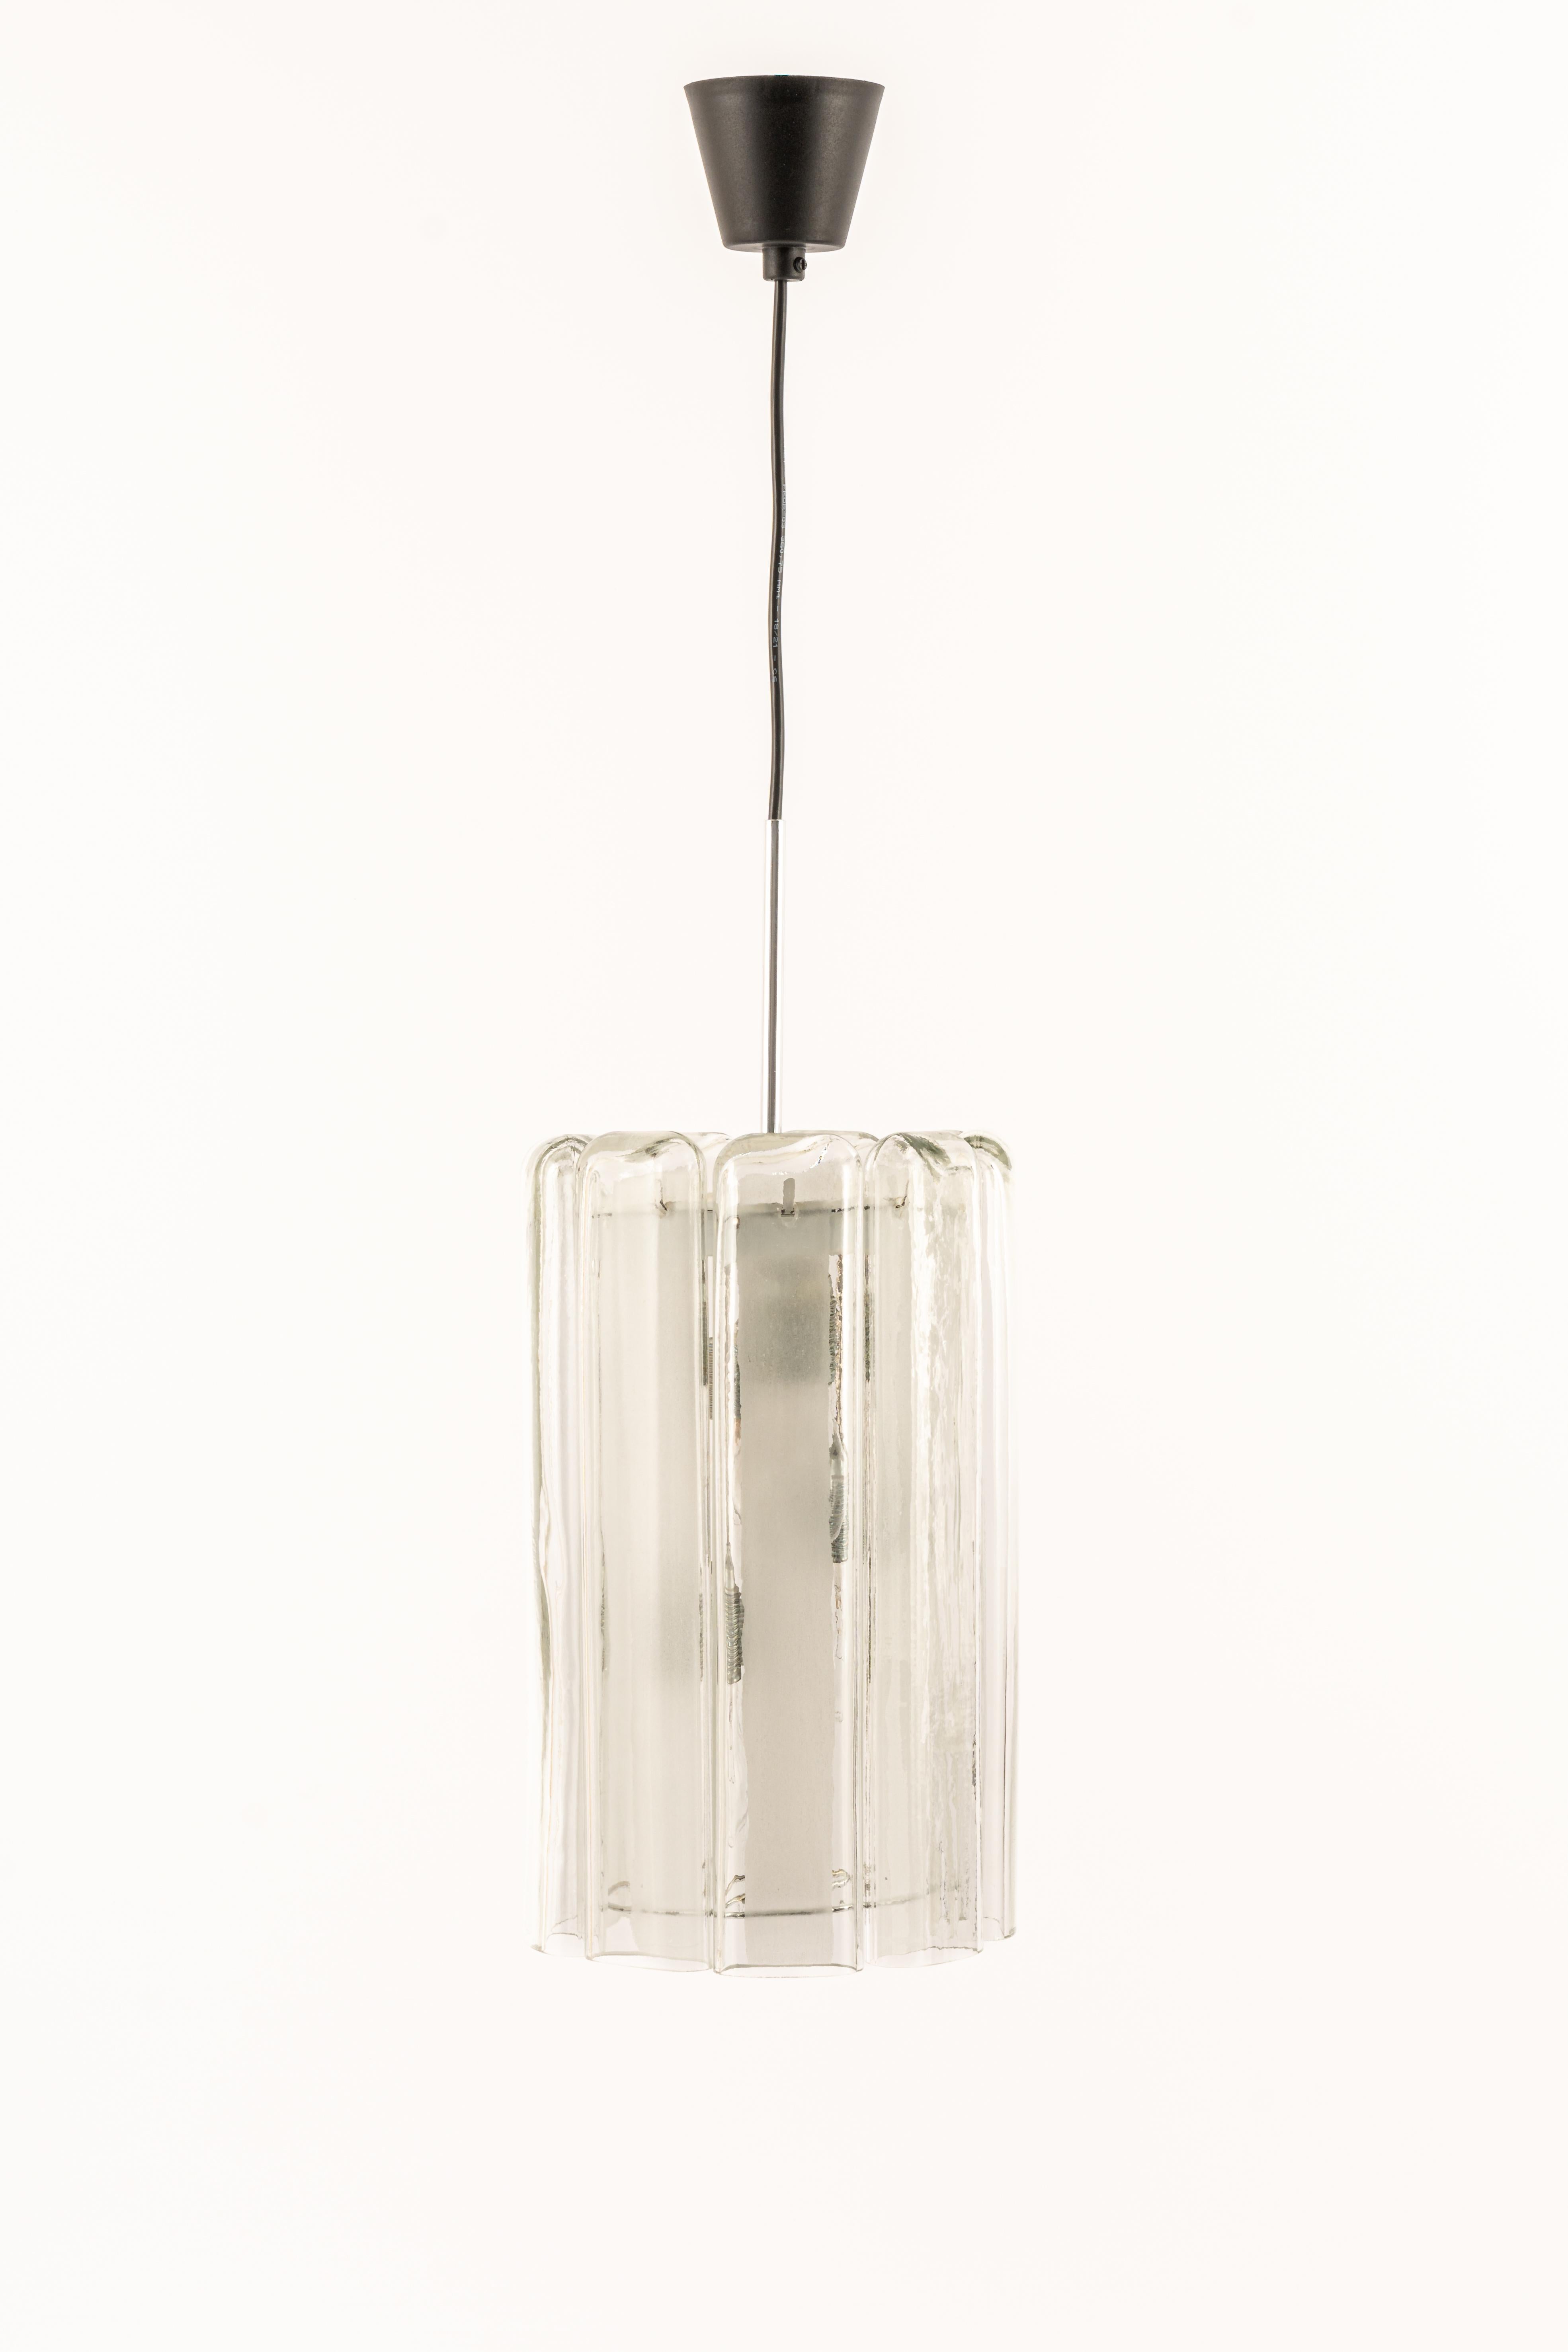 Late 20th Century 1 of 6 Cylindrical Pendant Fixture with Crystal Glass by Doria, Germany, 1970s For Sale